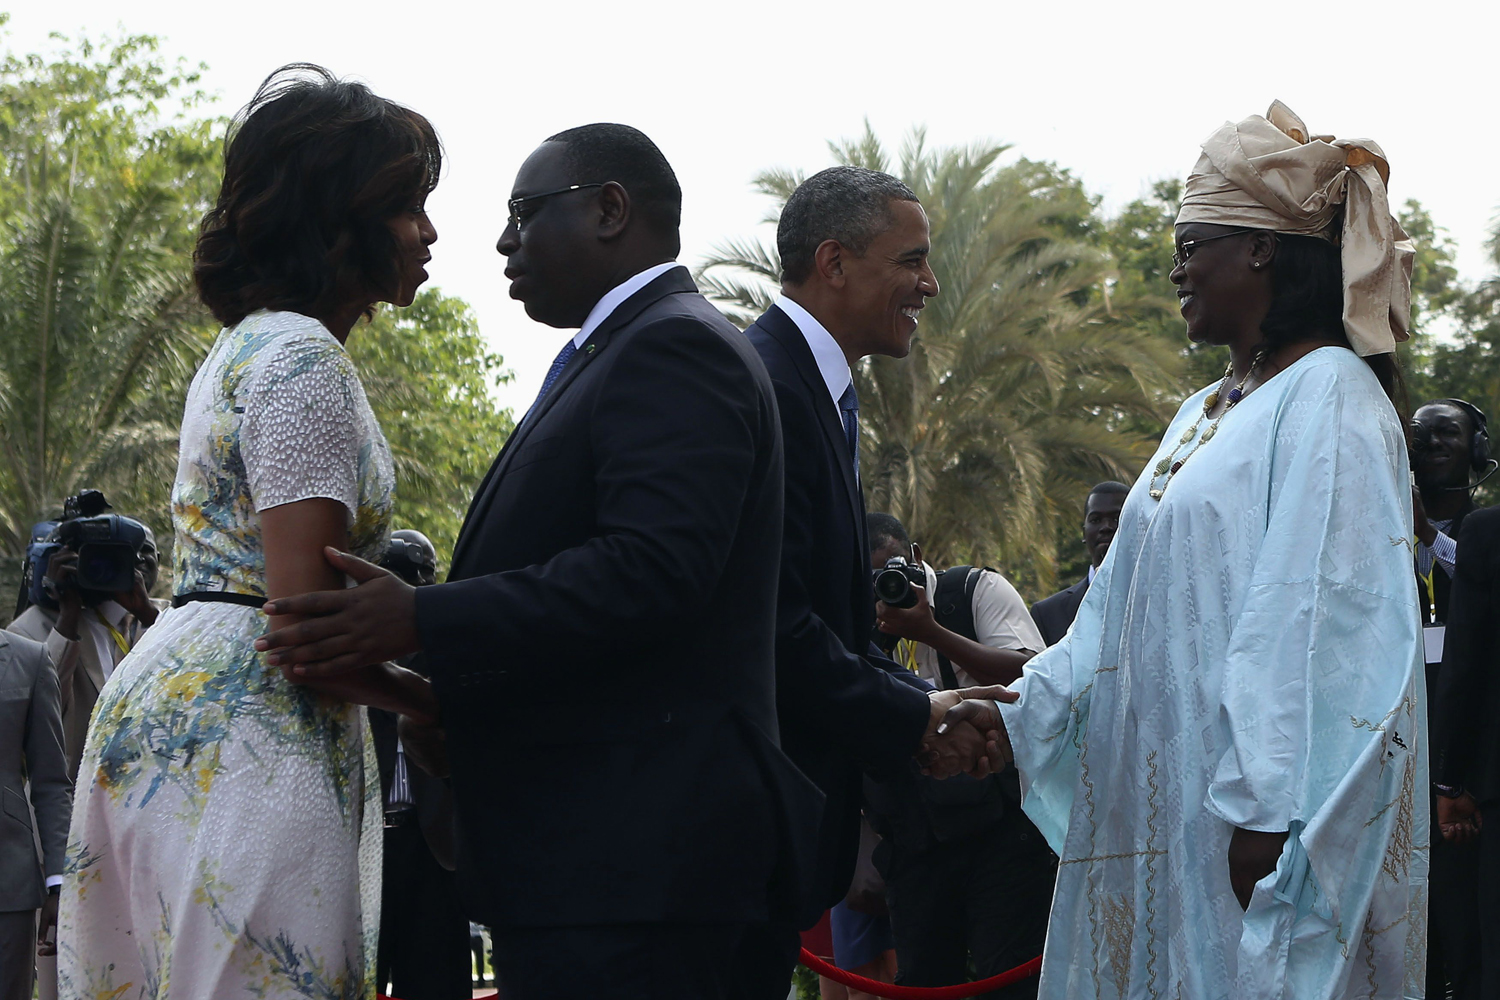 June 27, 2013. U.S. President Barack Obama and first lady Michelle Obama are greeted by Senegal President Macky Sall and his wife Mariame at the Presidential Palace in Dakar.